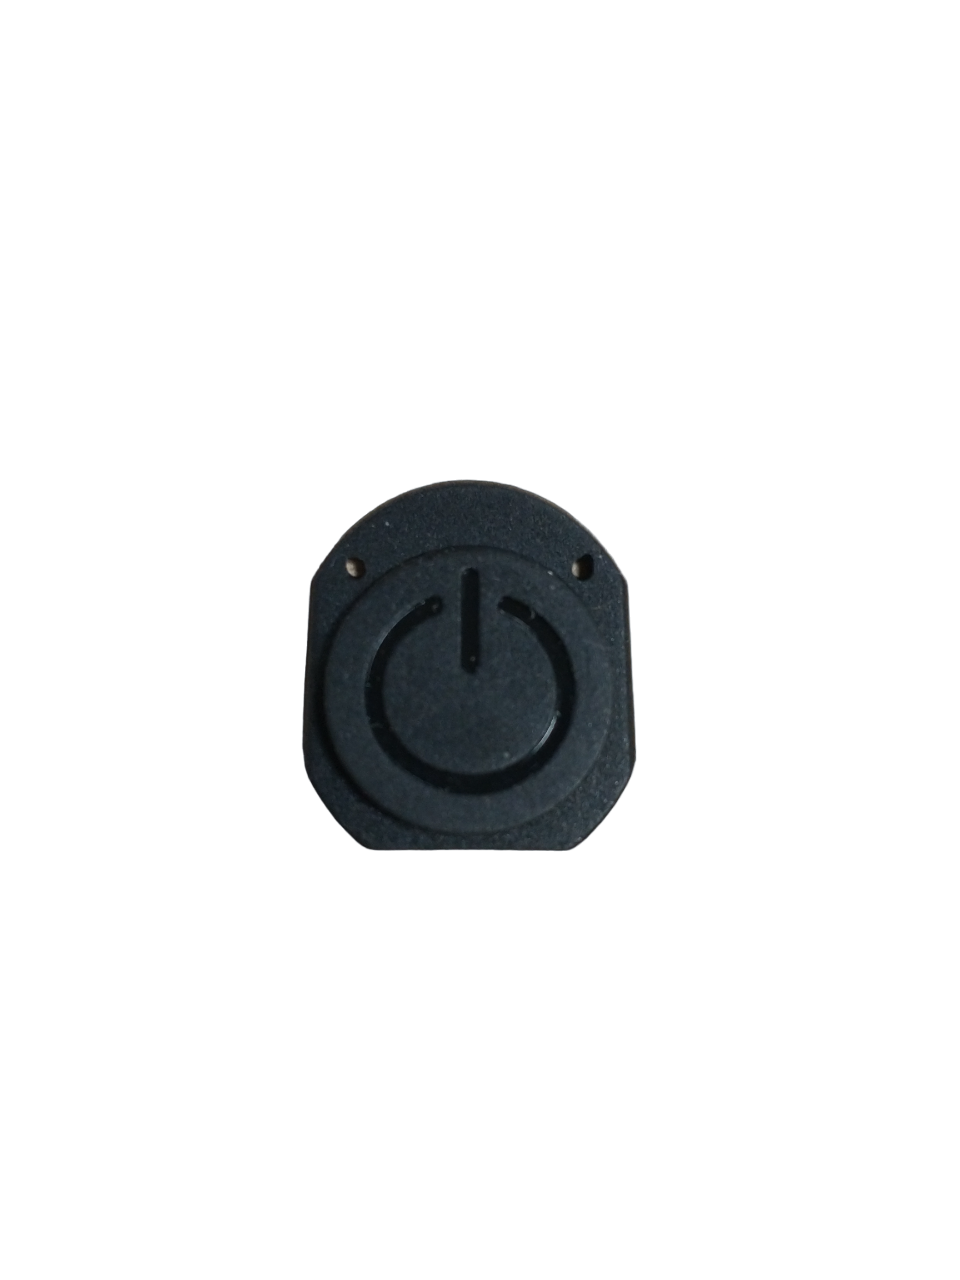 Inmotion V10 Switch rubber button